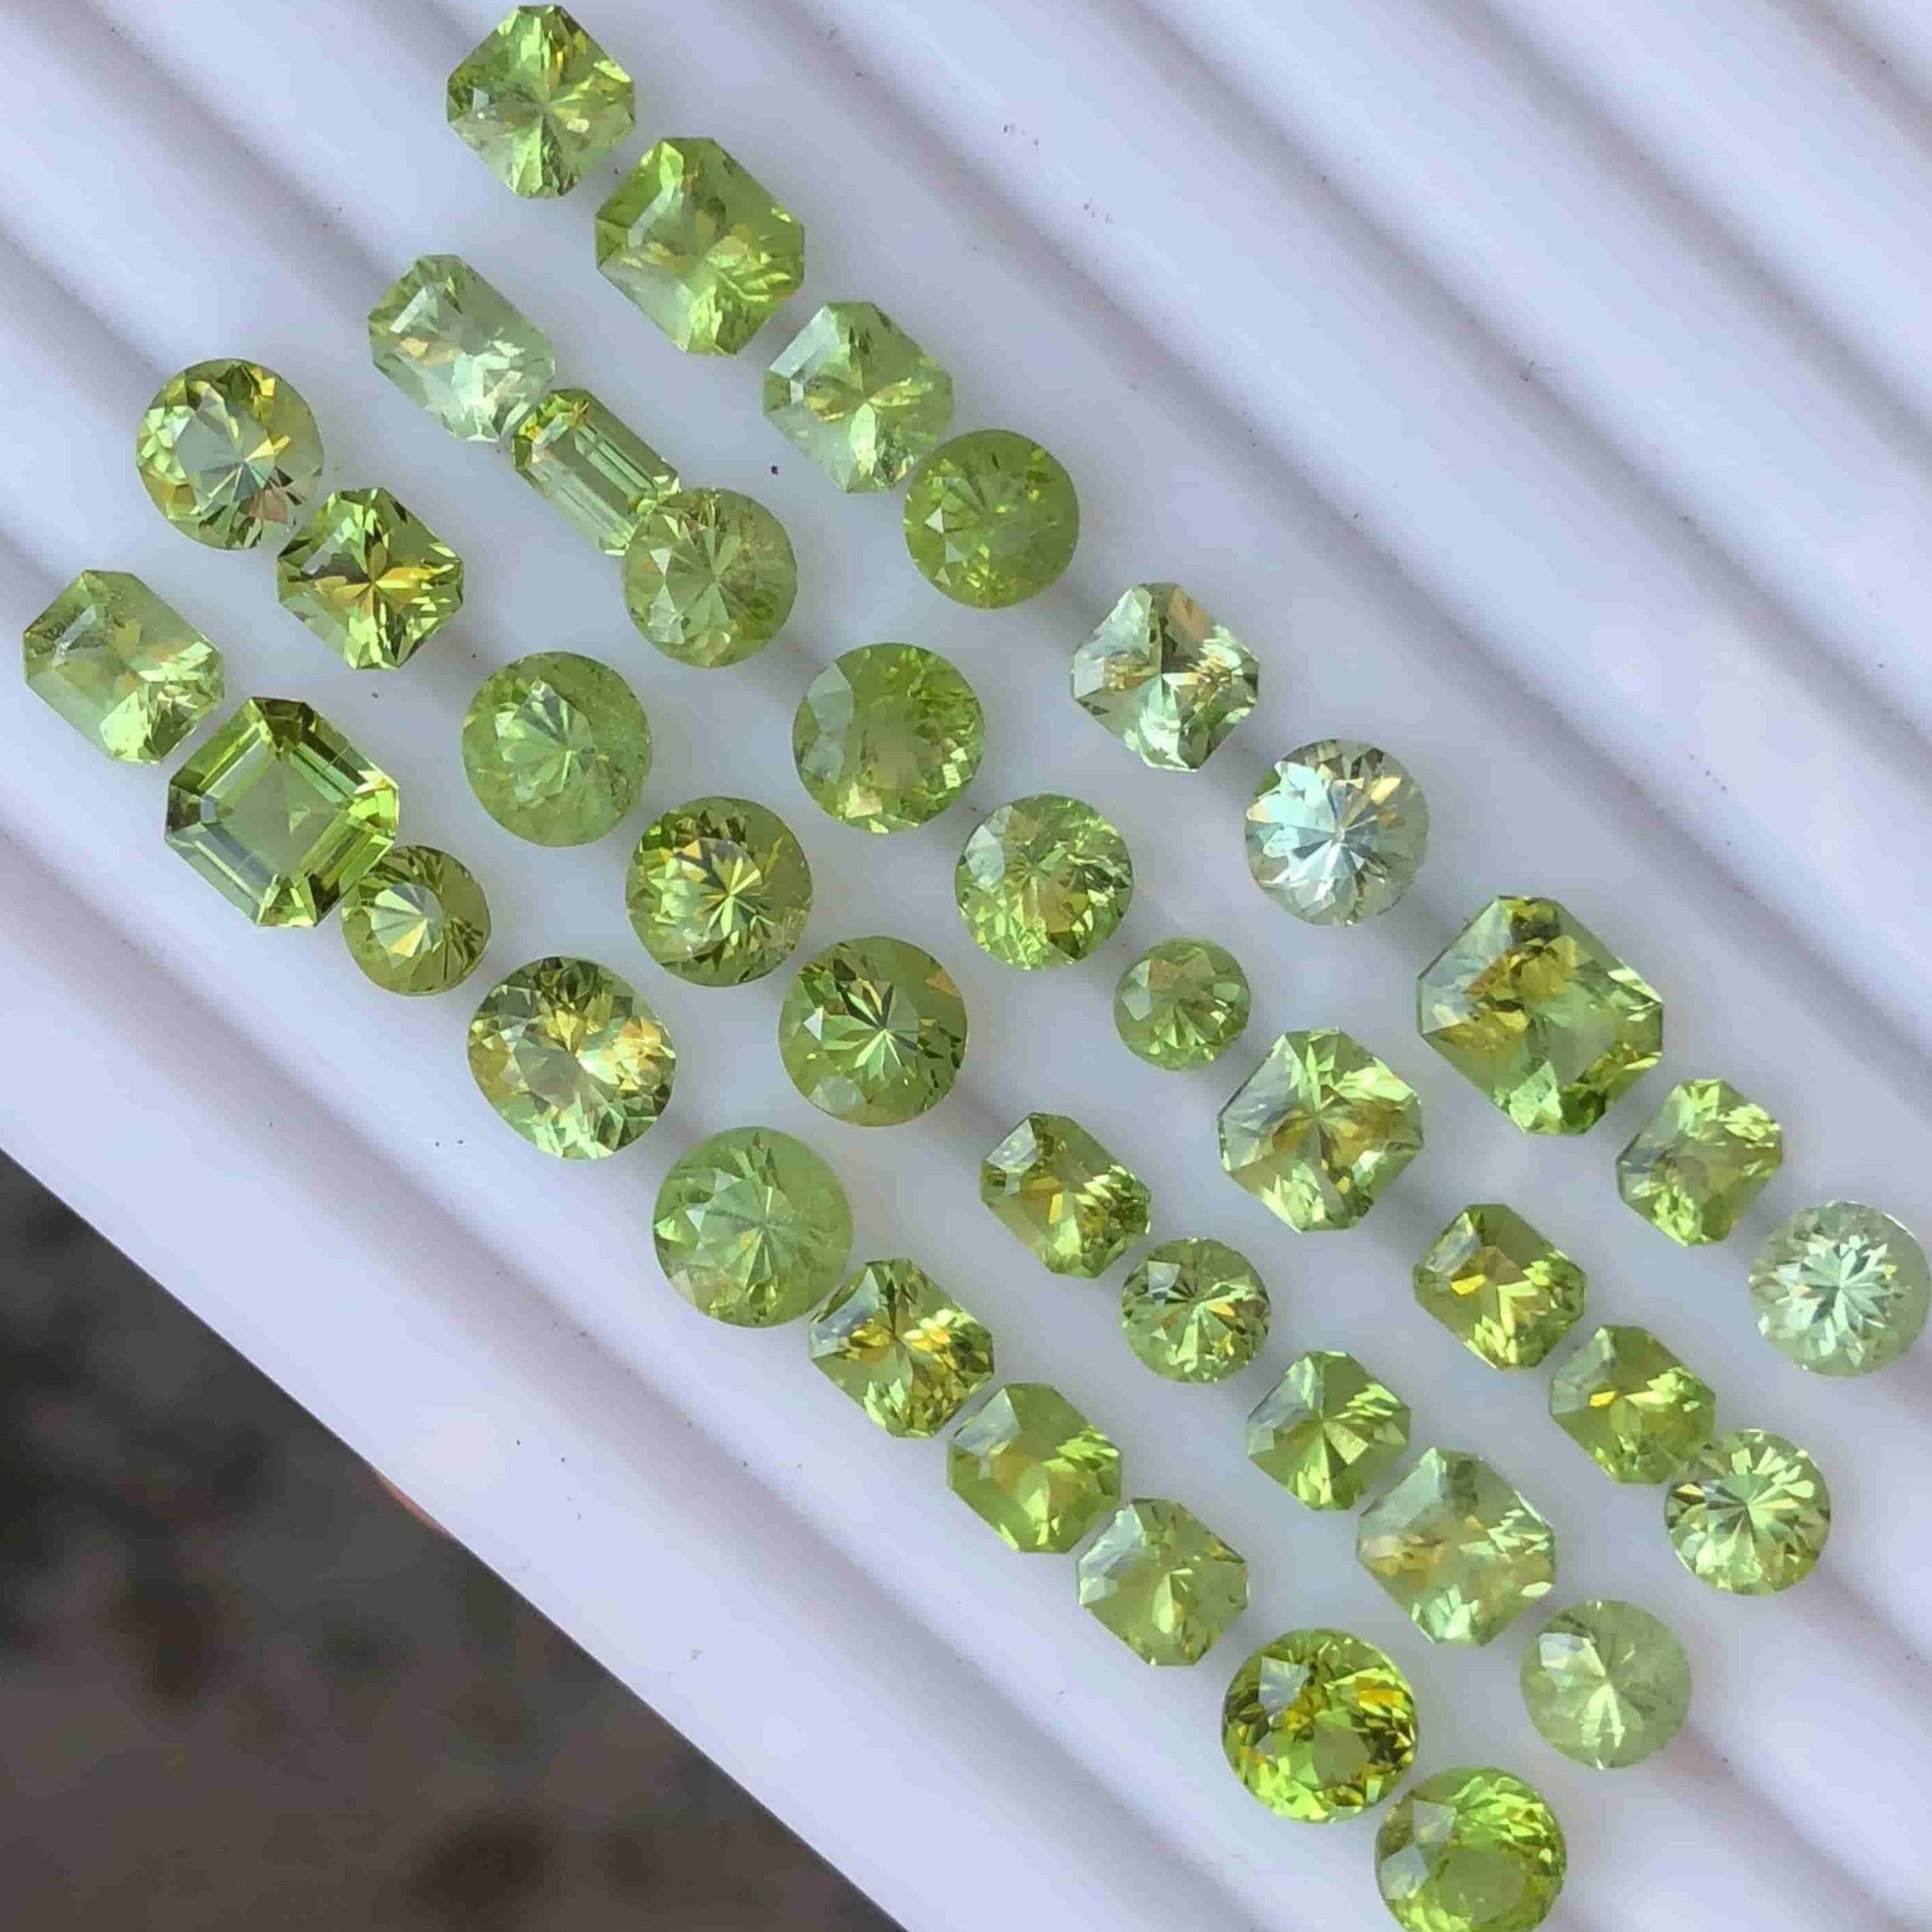 Gemstone Name	Small Size Natural Loose Peridot Batch
Weight	37.10 carats
Weight Range	0.50 to 1.75 carats
Treatment	None
Locality	Pakistan
Clarity	SI to Eye clean
Shape	Custom Cuts




Discover the enchanting allure of our 37.10-carat small-sized